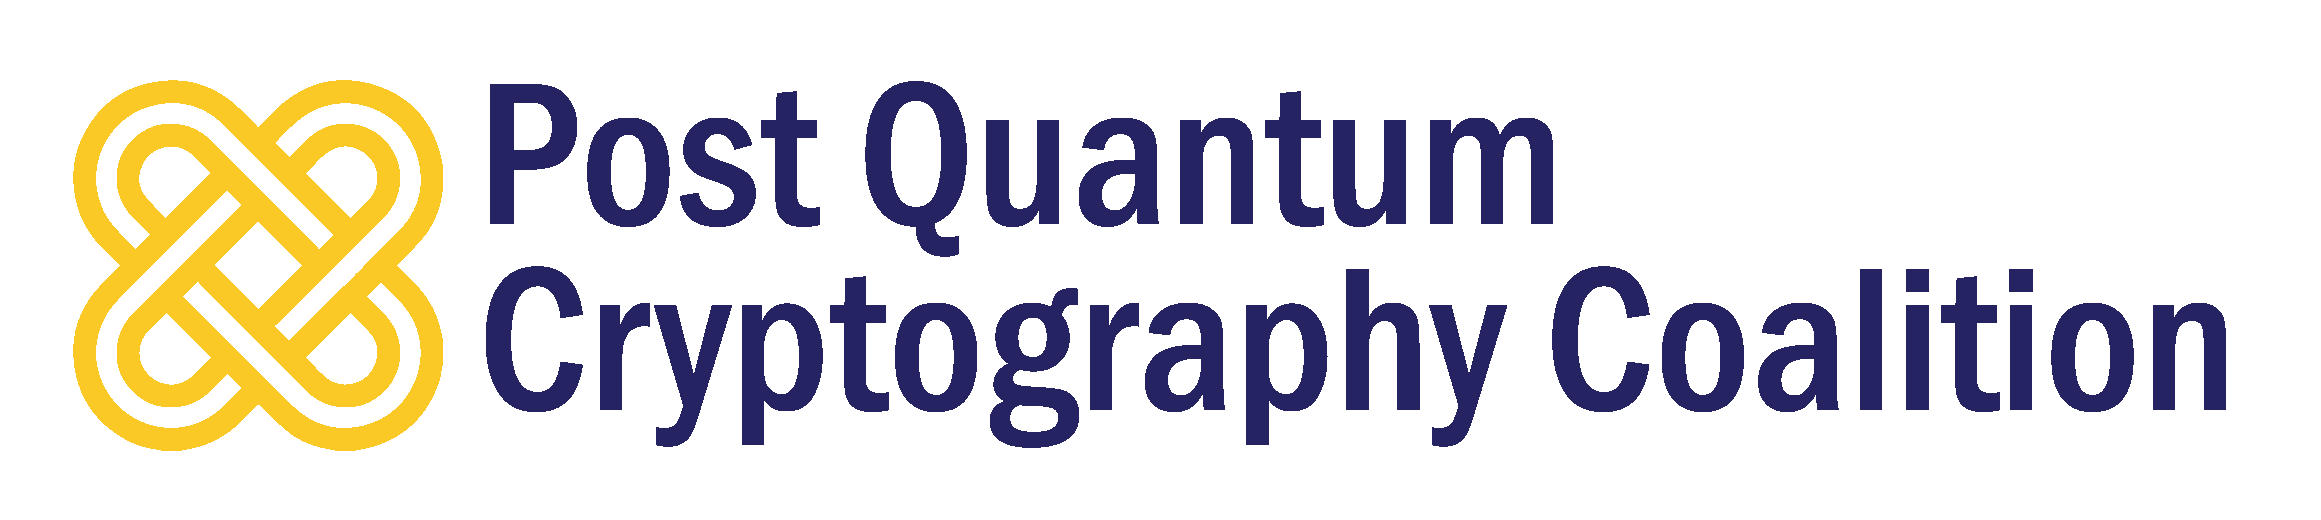 Post-Quantum Cryptography Coalition